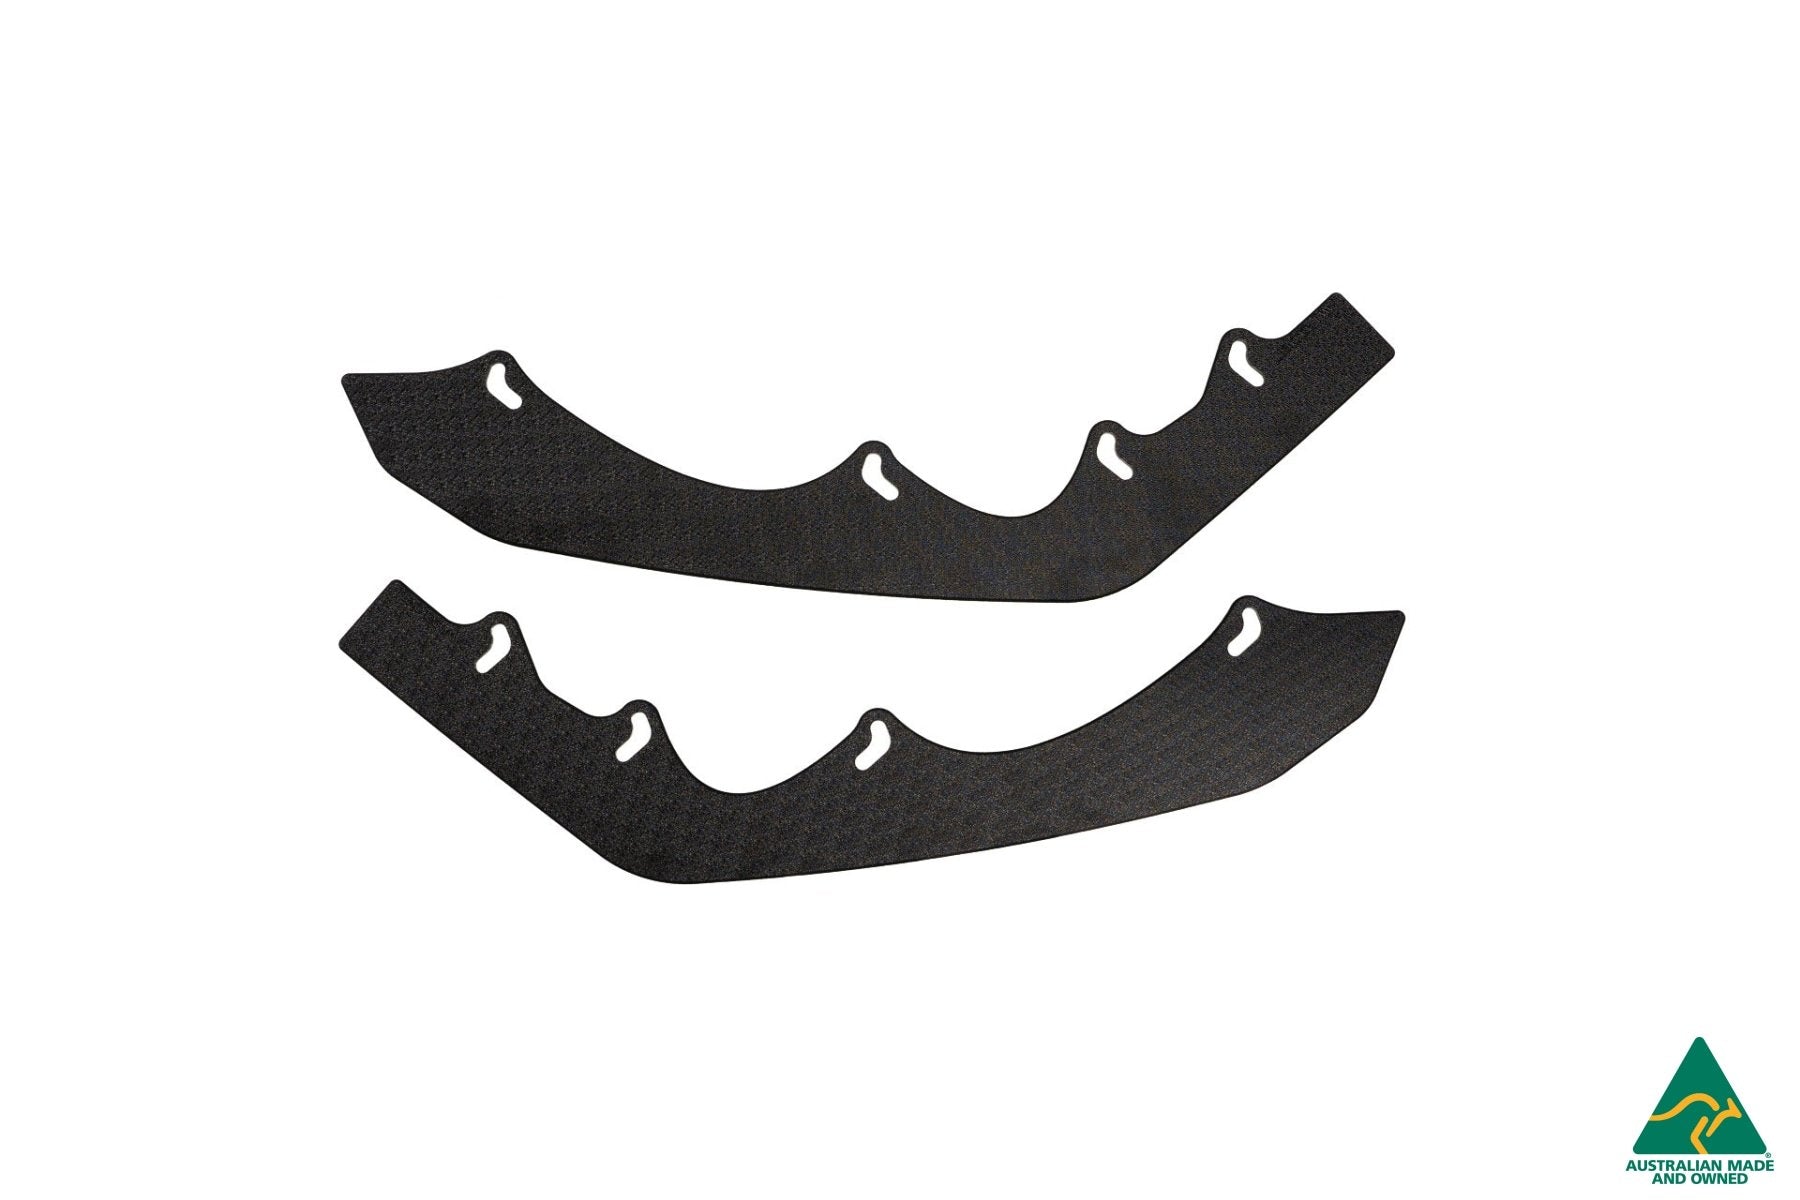 AW Polo GTI Front Lip Splitter Extensions (Pair) - MODE Auto Concepts